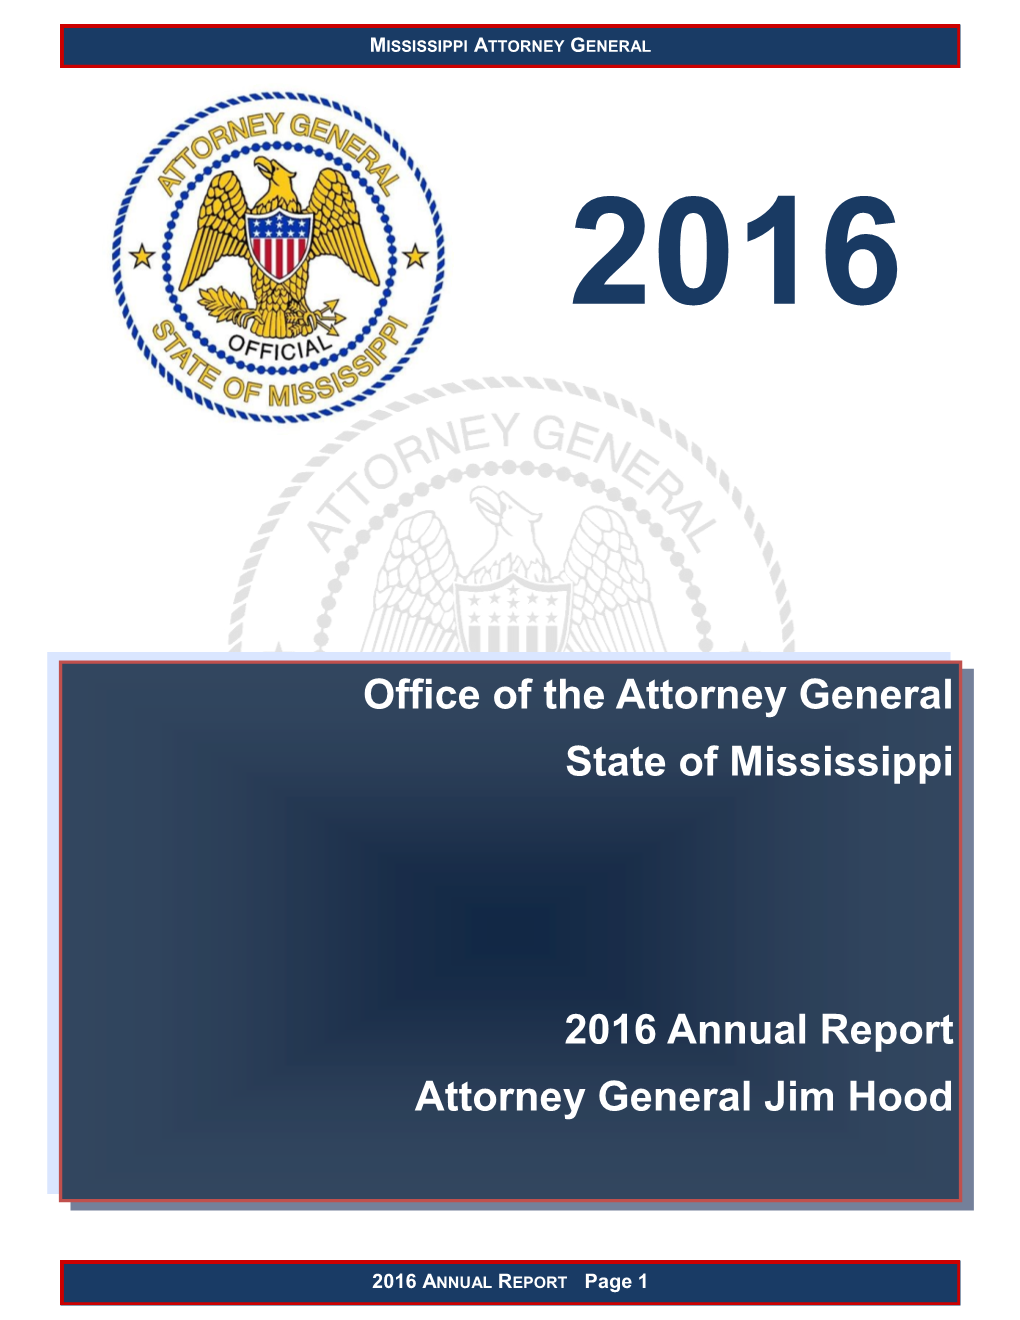 Office of the Attorney General State of Mississippi 2016 Annual Report